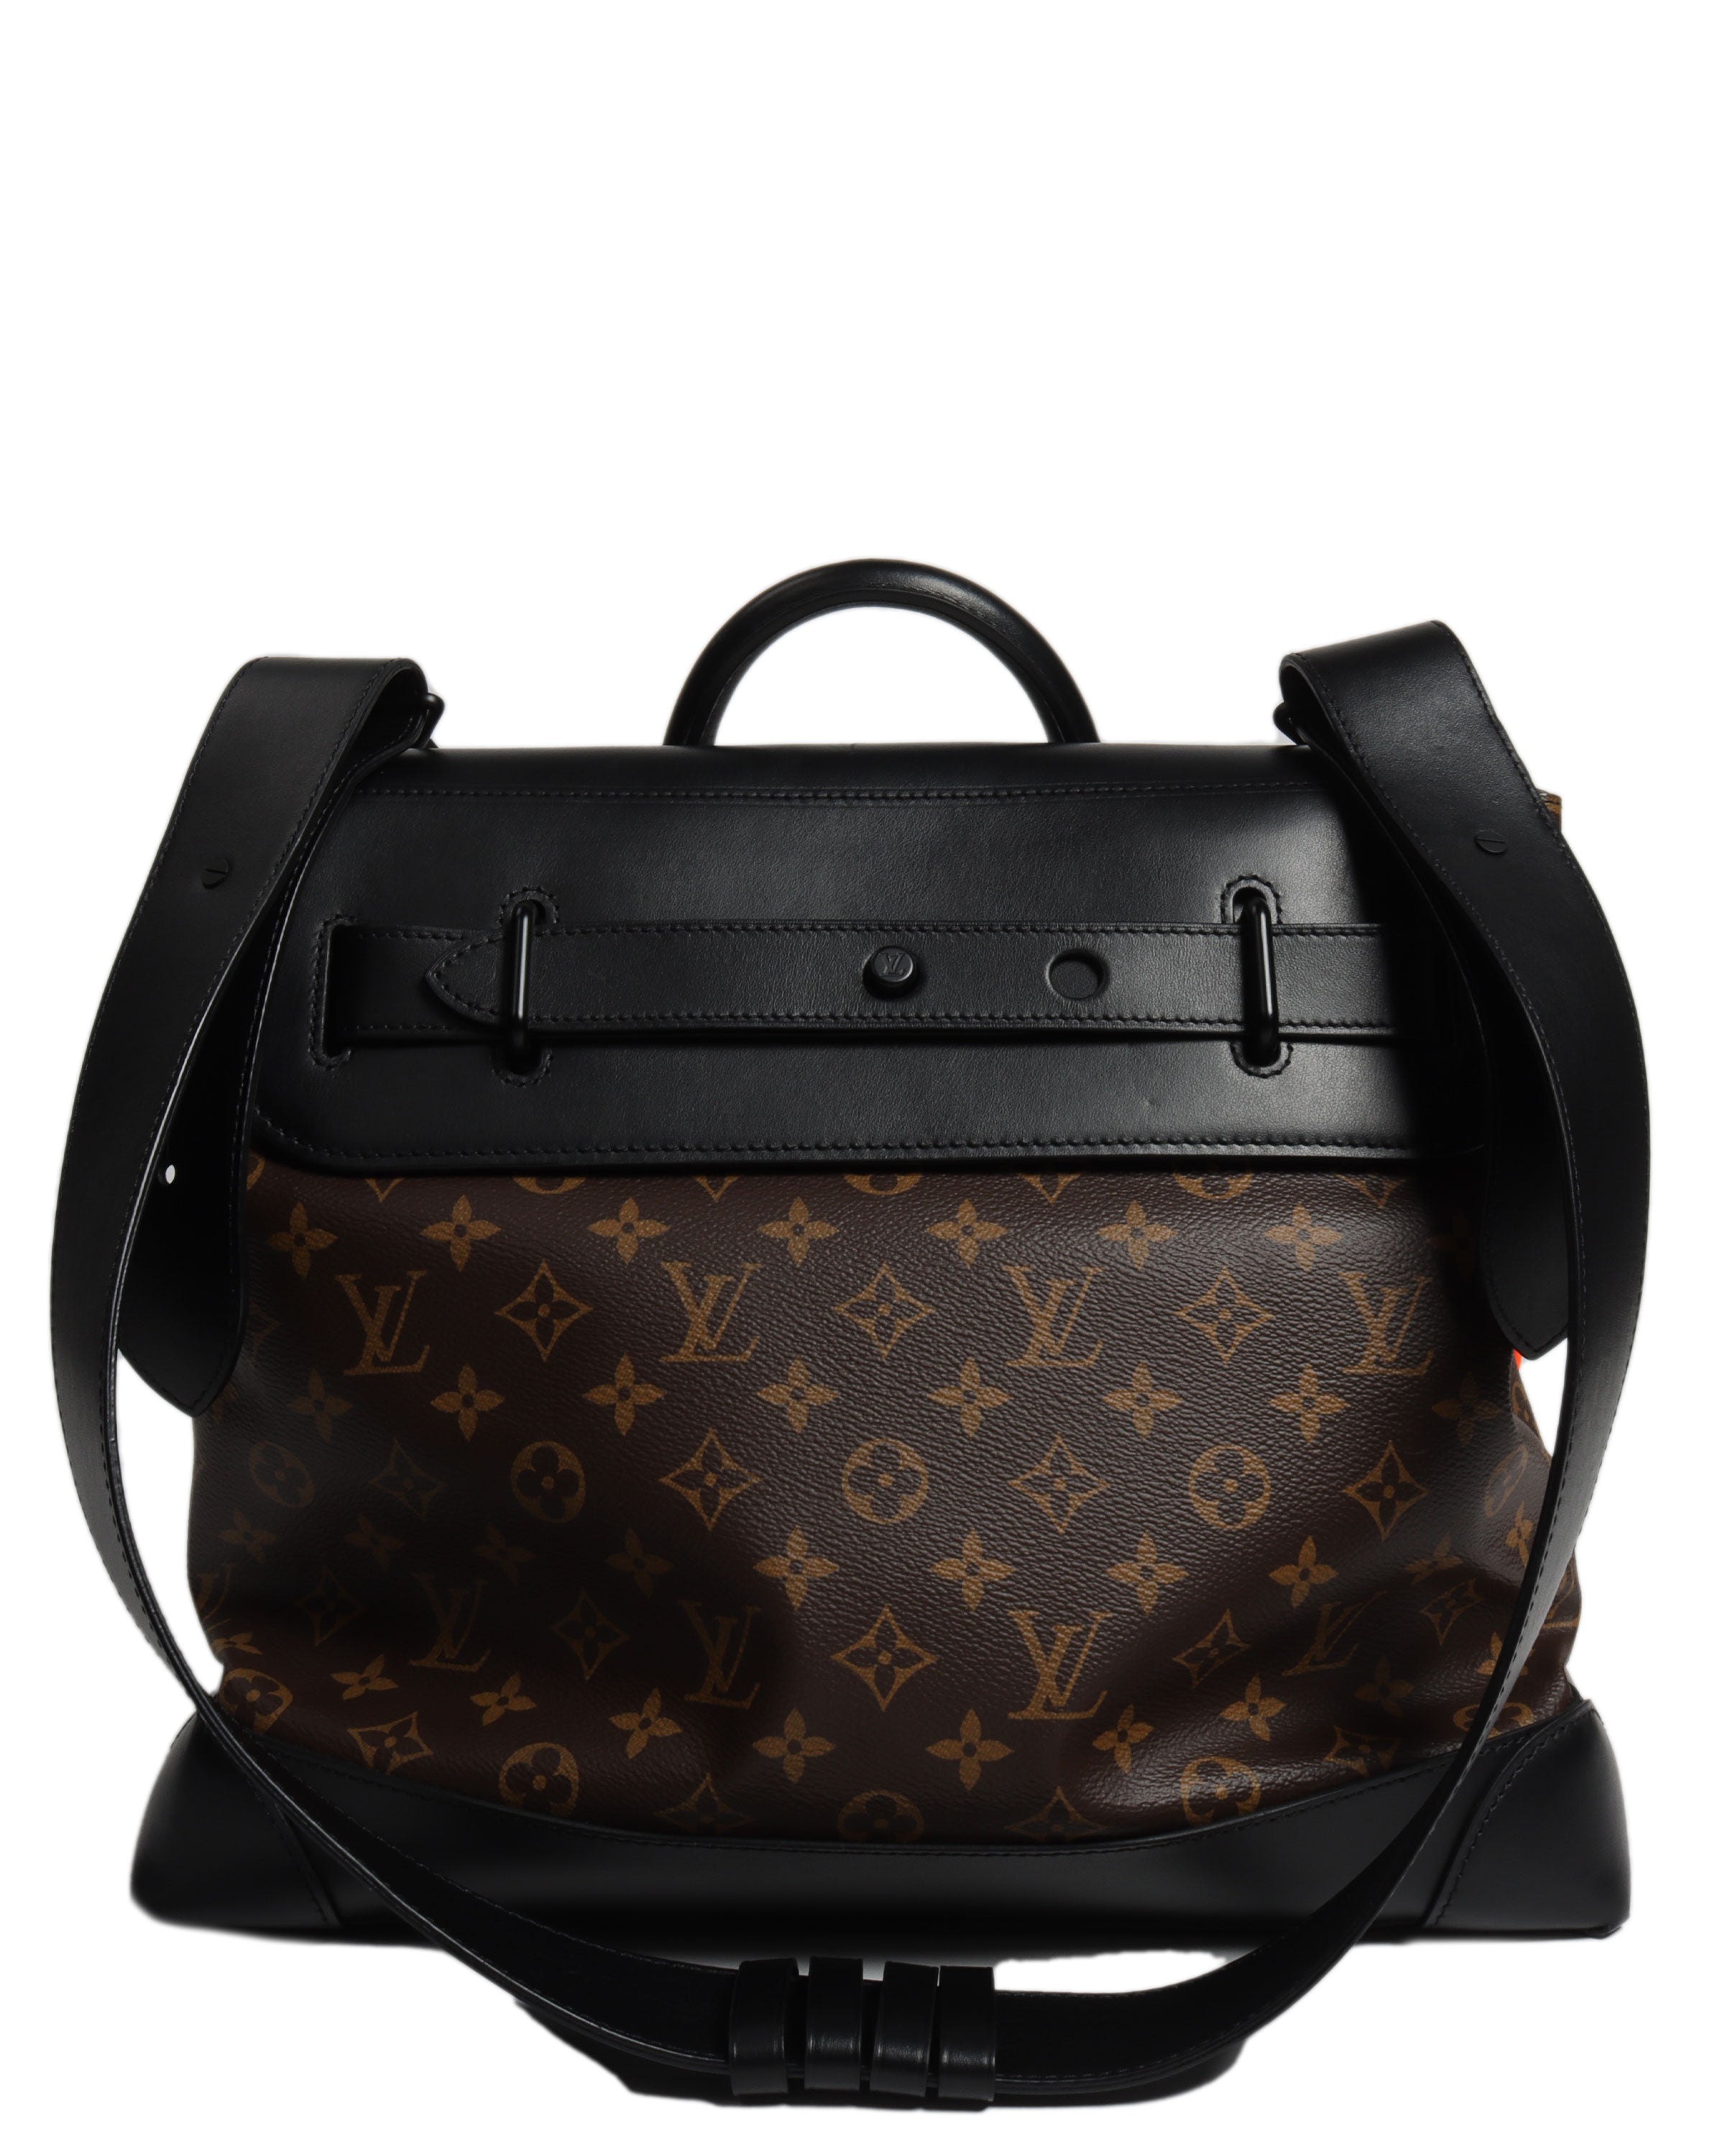 Louis Vuitton 2019 pre-owned Monogram Eclipse Steamer Backpack